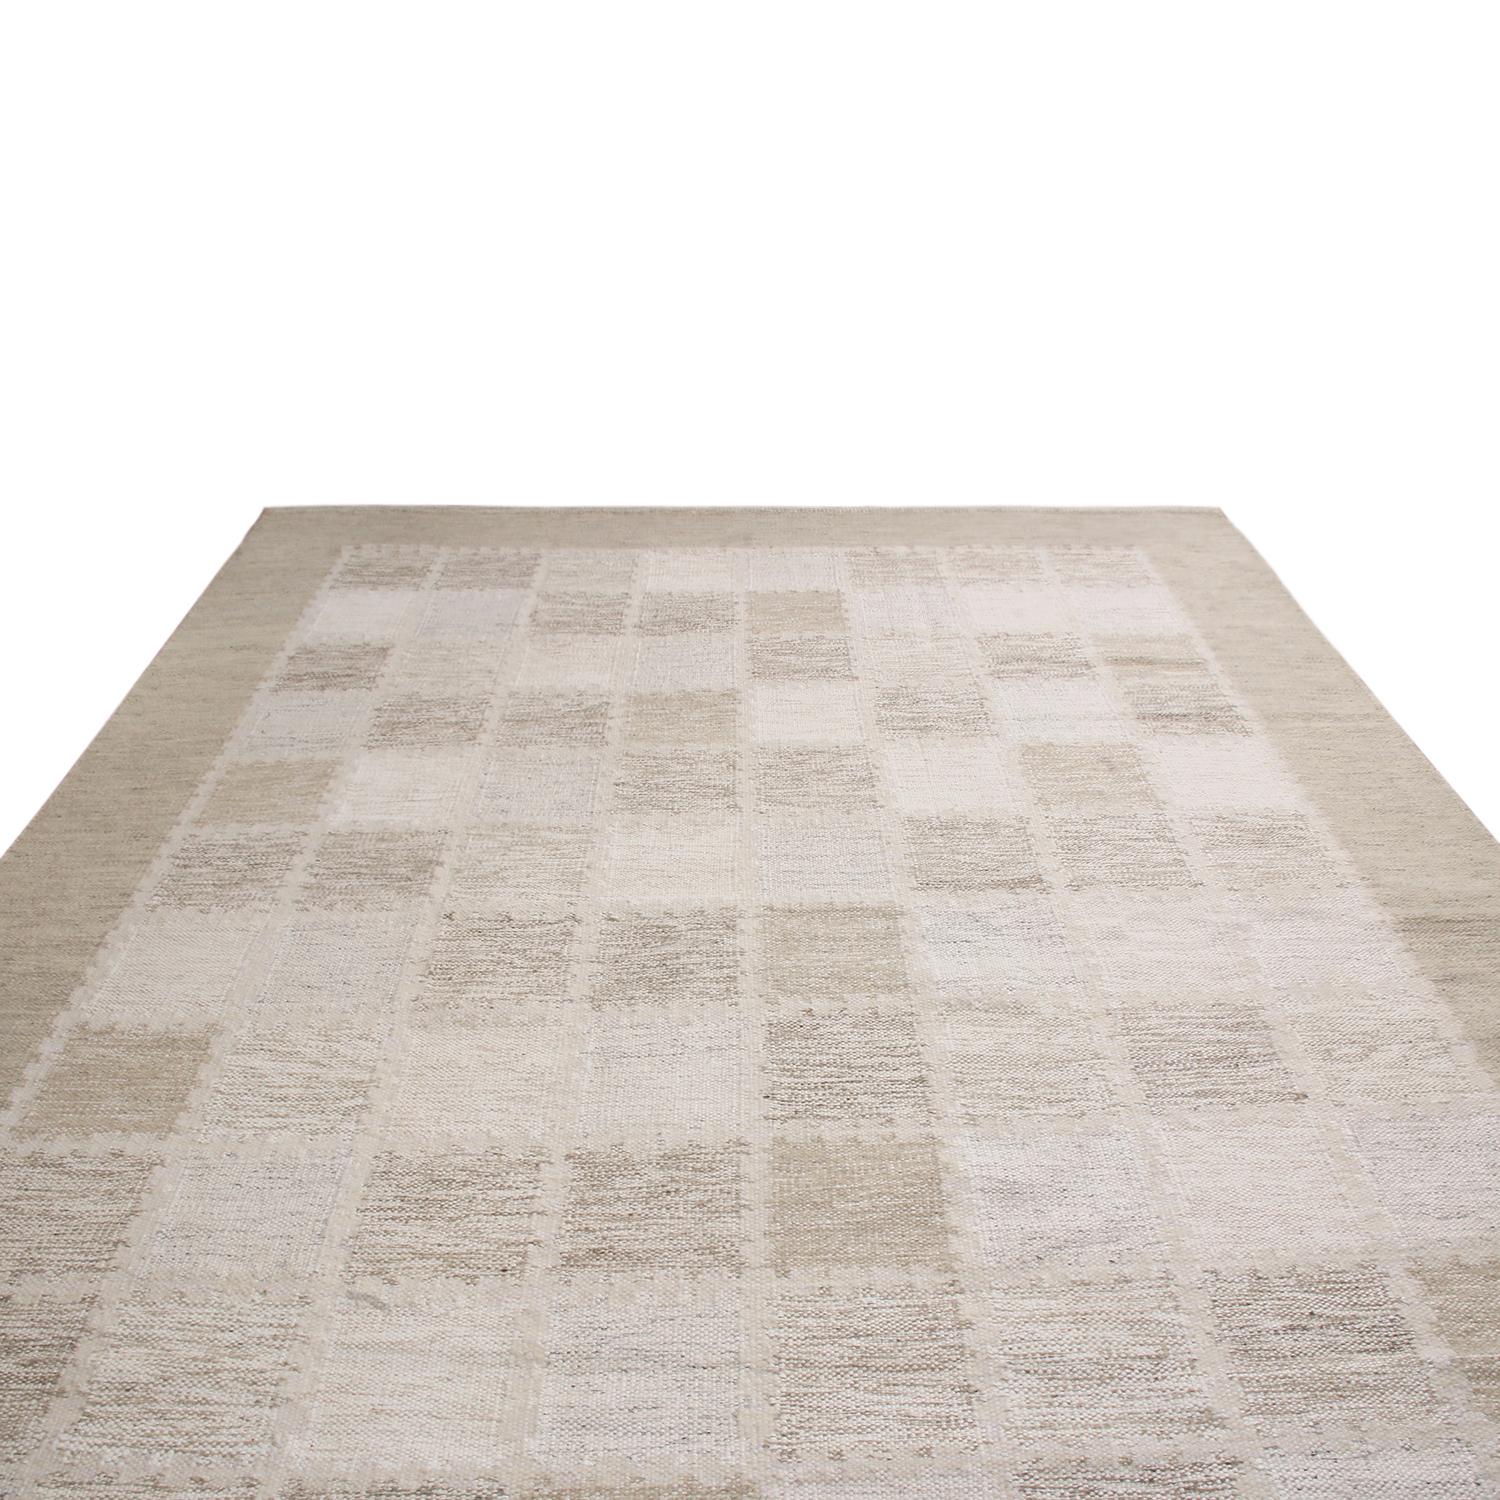 Originating from India, this hand knotted wool pile rug hails from Rug & Kilim’s Scandinavian-inspired collection, featuring a distinct tribal geometric all-over field design with off-white, gray, and multi-tonal beige brown colorways bound in